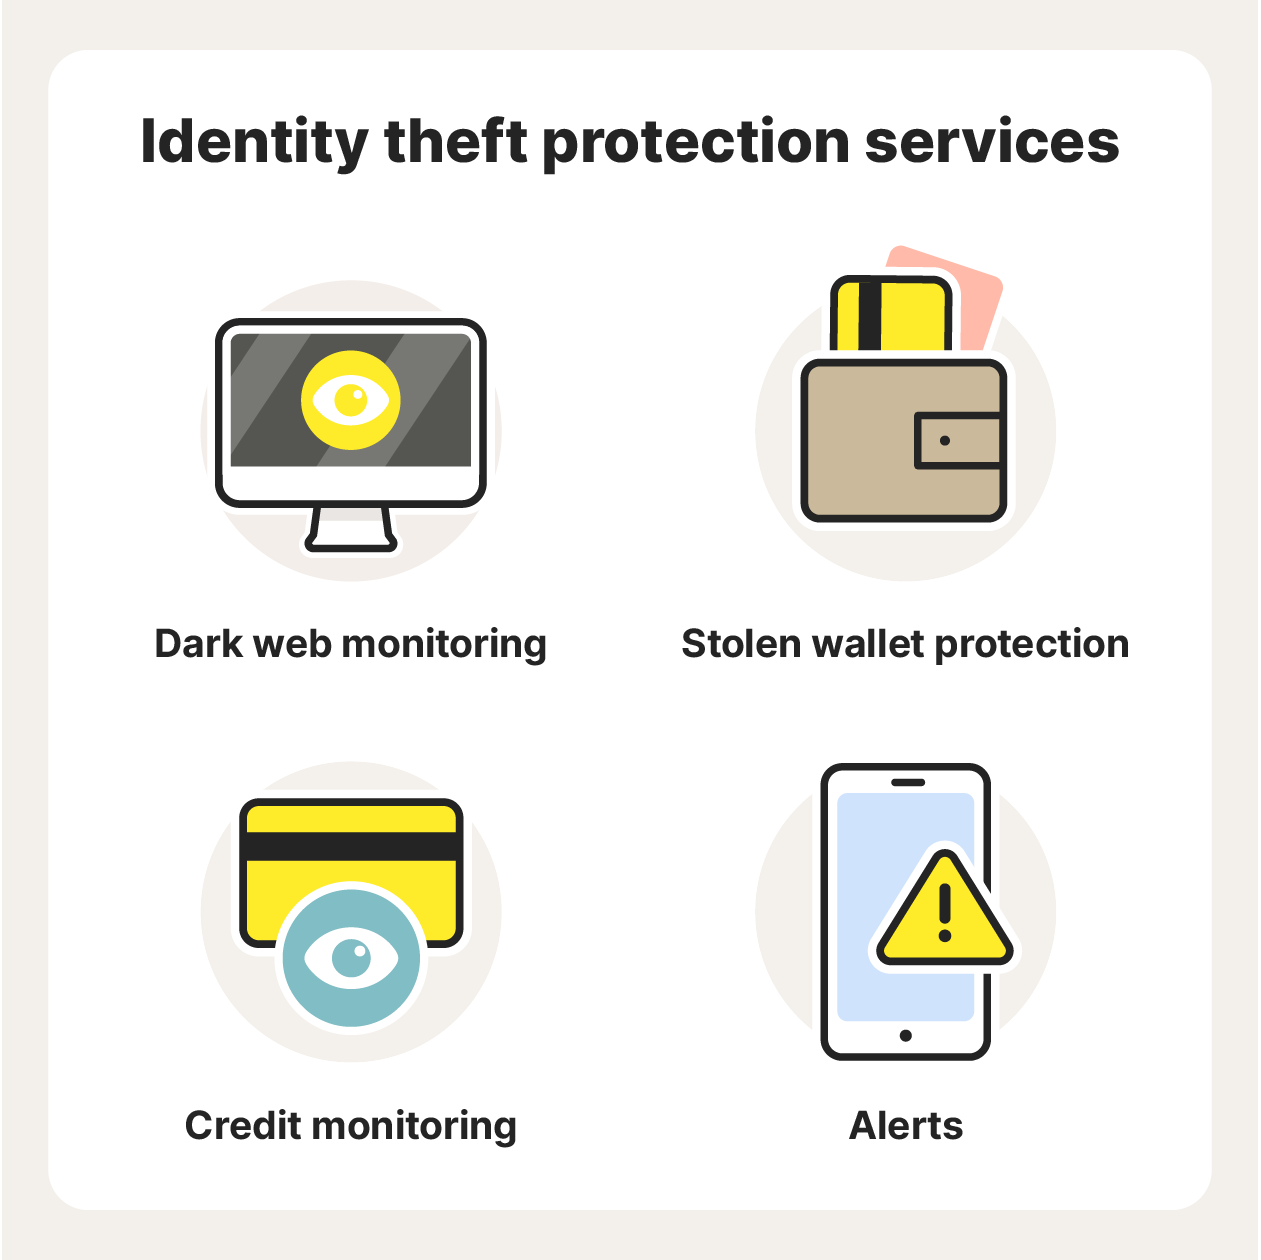 Identity theft protection services help prevent identity fraud.